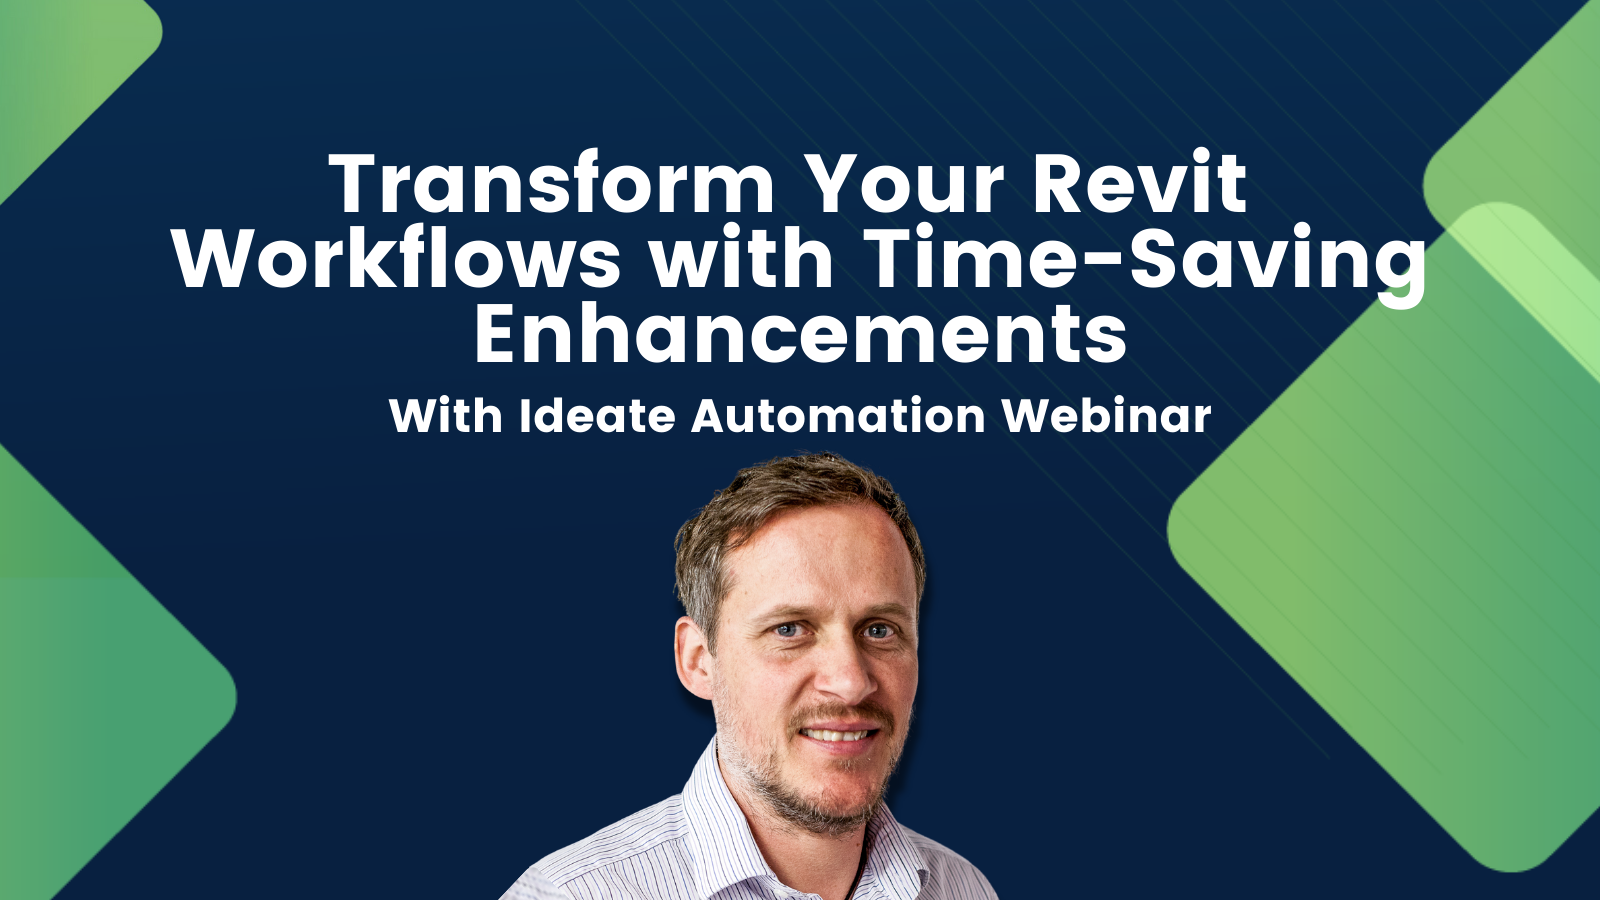 Transform Your Revit Workflows with Ideate Automation's Time-Saving Enhancements